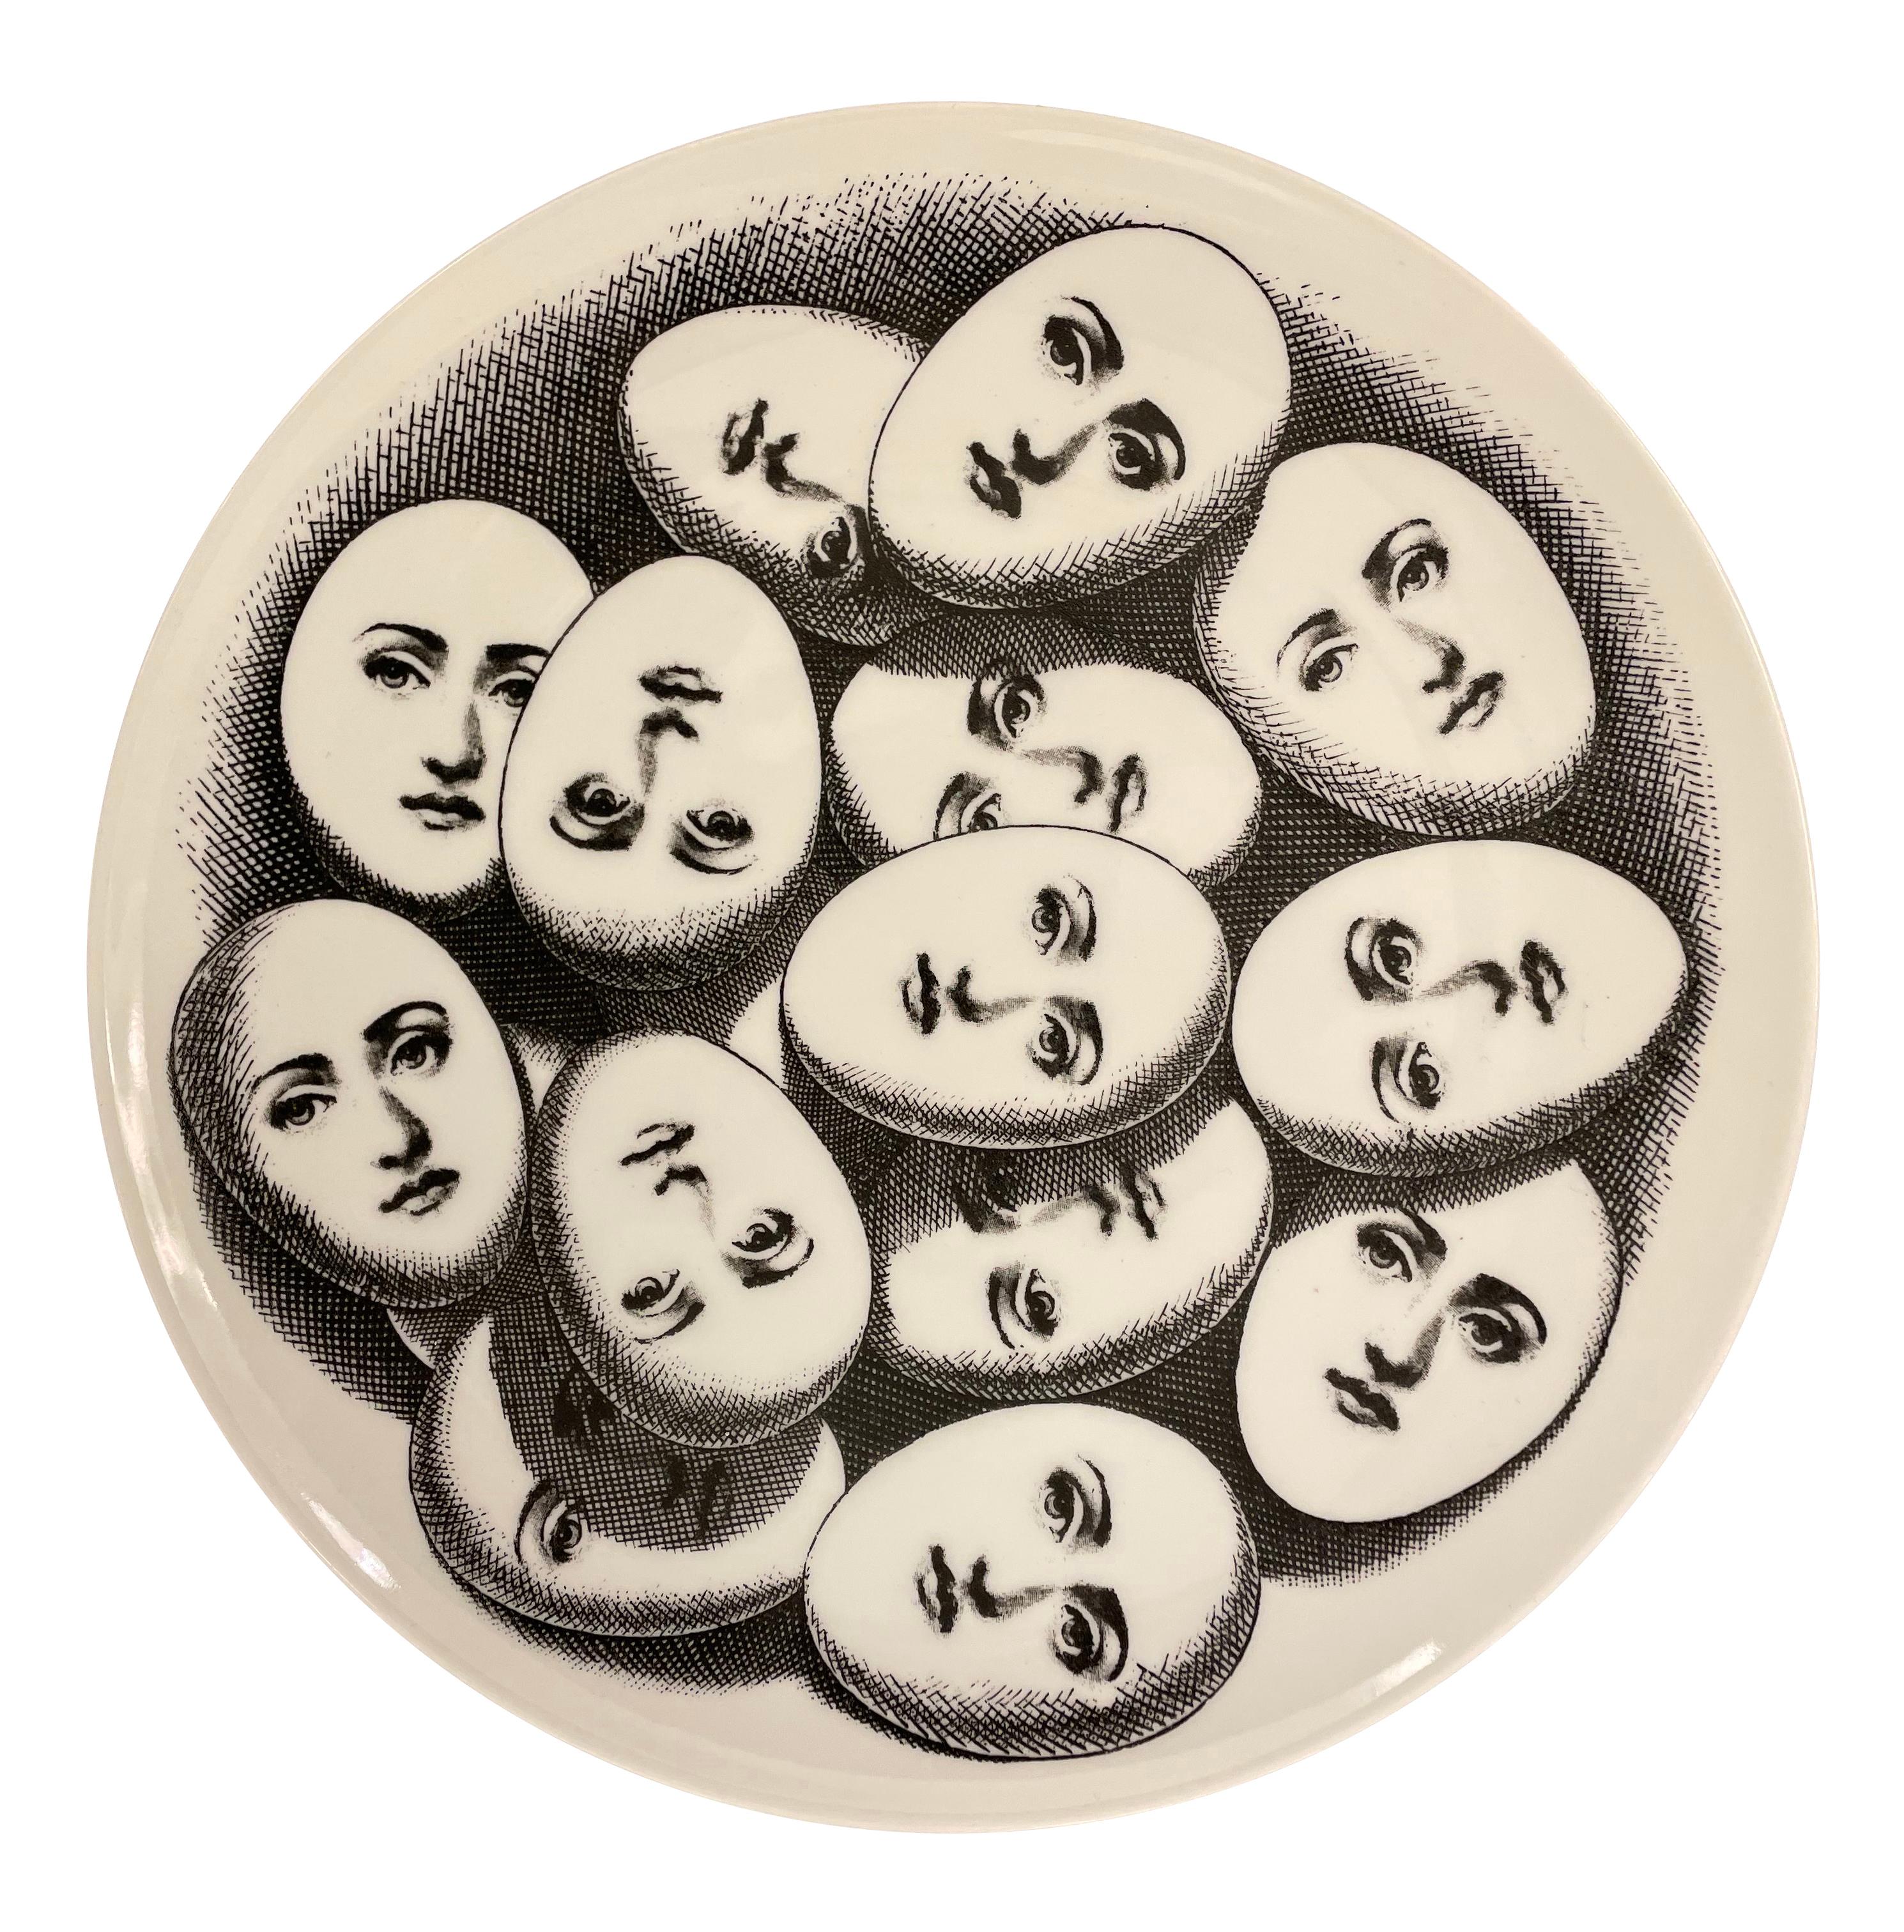 Mid-20th Century Vintage Piero Fornasetti Plates from the 